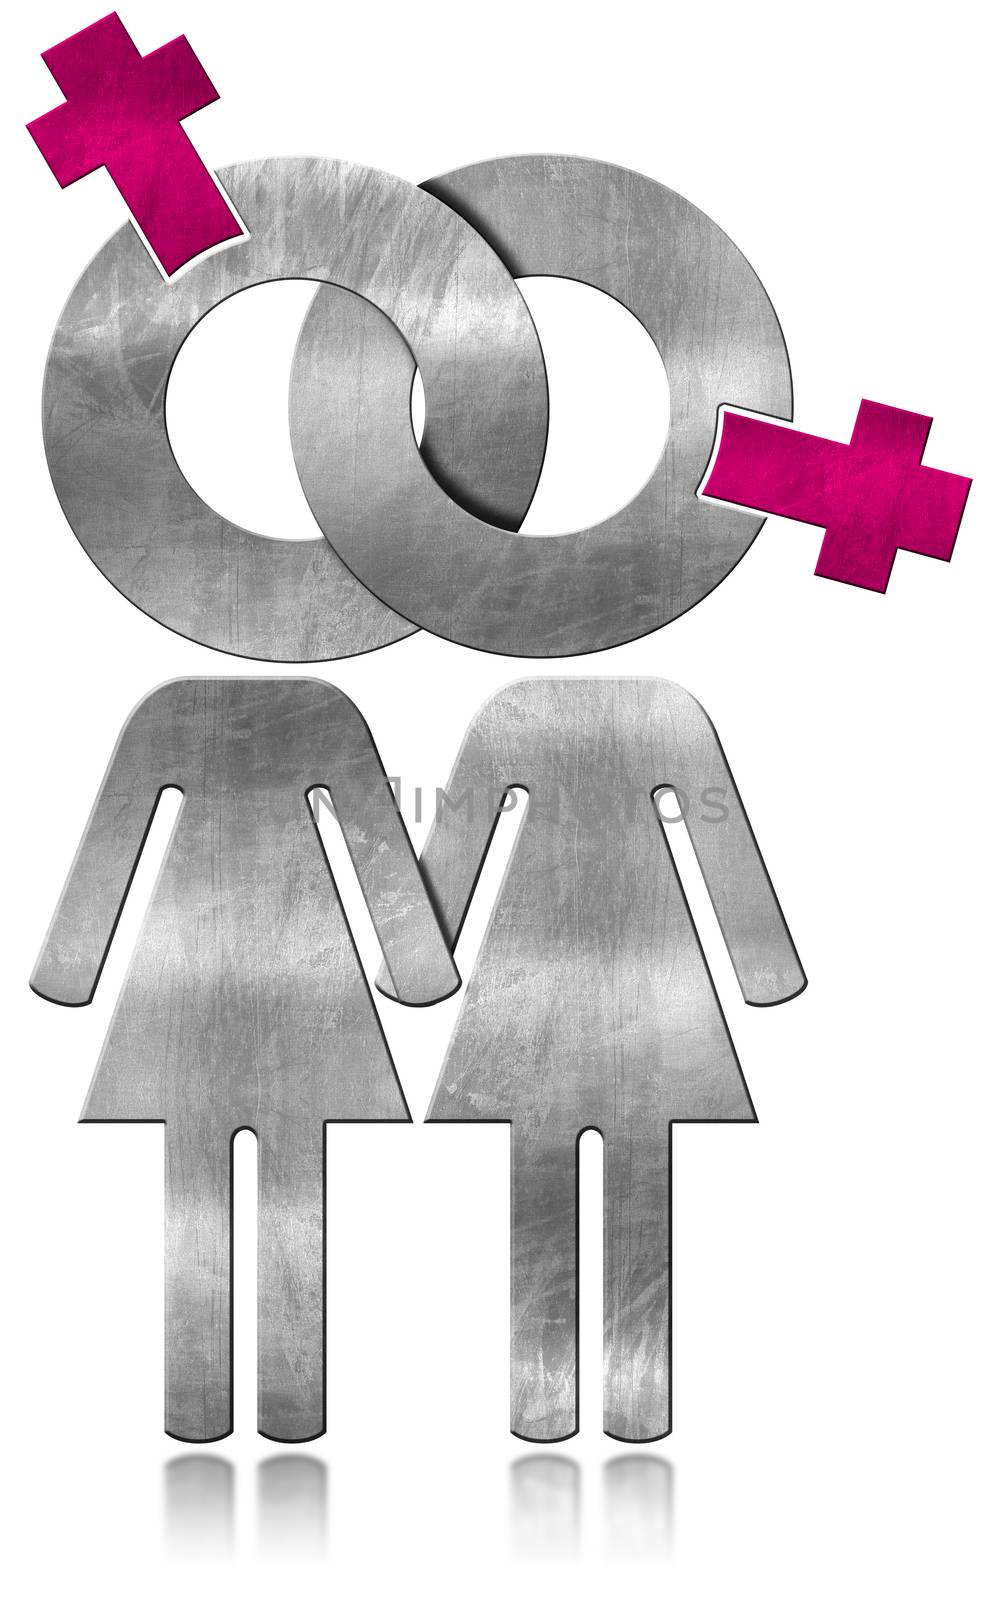 Metallic symbol with a lesbians couple holding hands, lesbian relationship concept. Isolated on white background